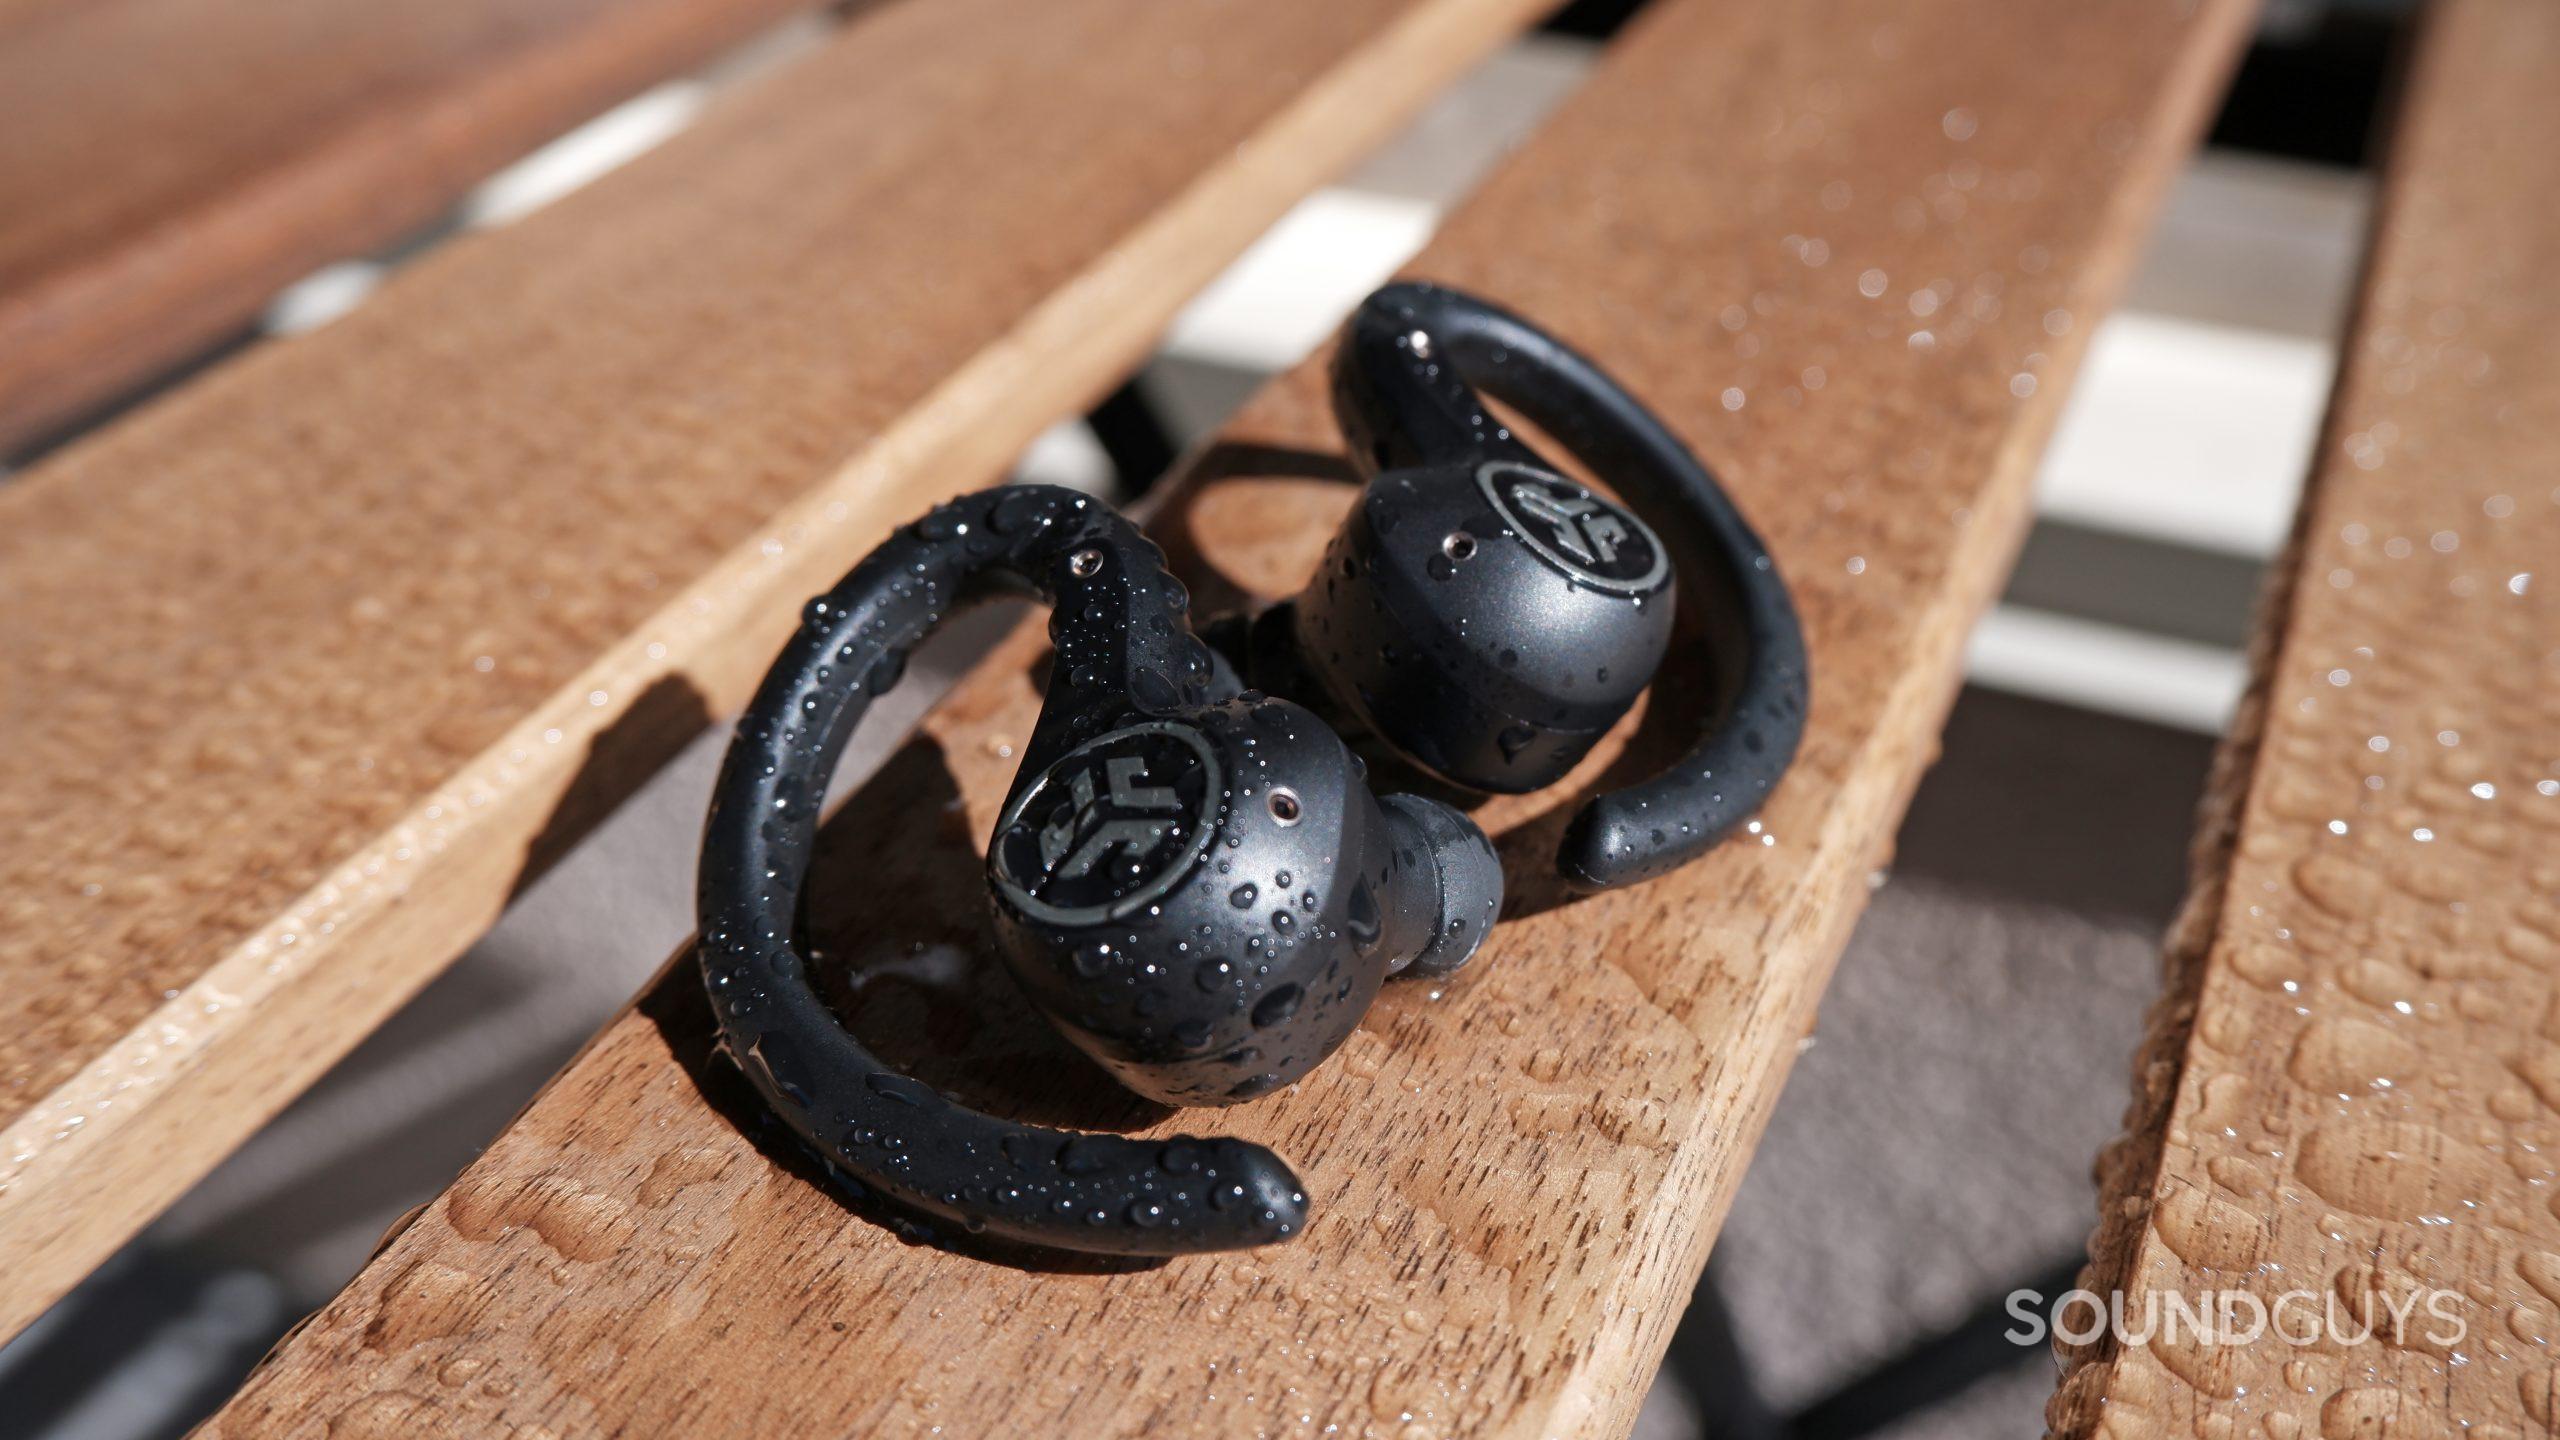 Push Active True Wireless Earbuds Featuring Skull-iQ technology